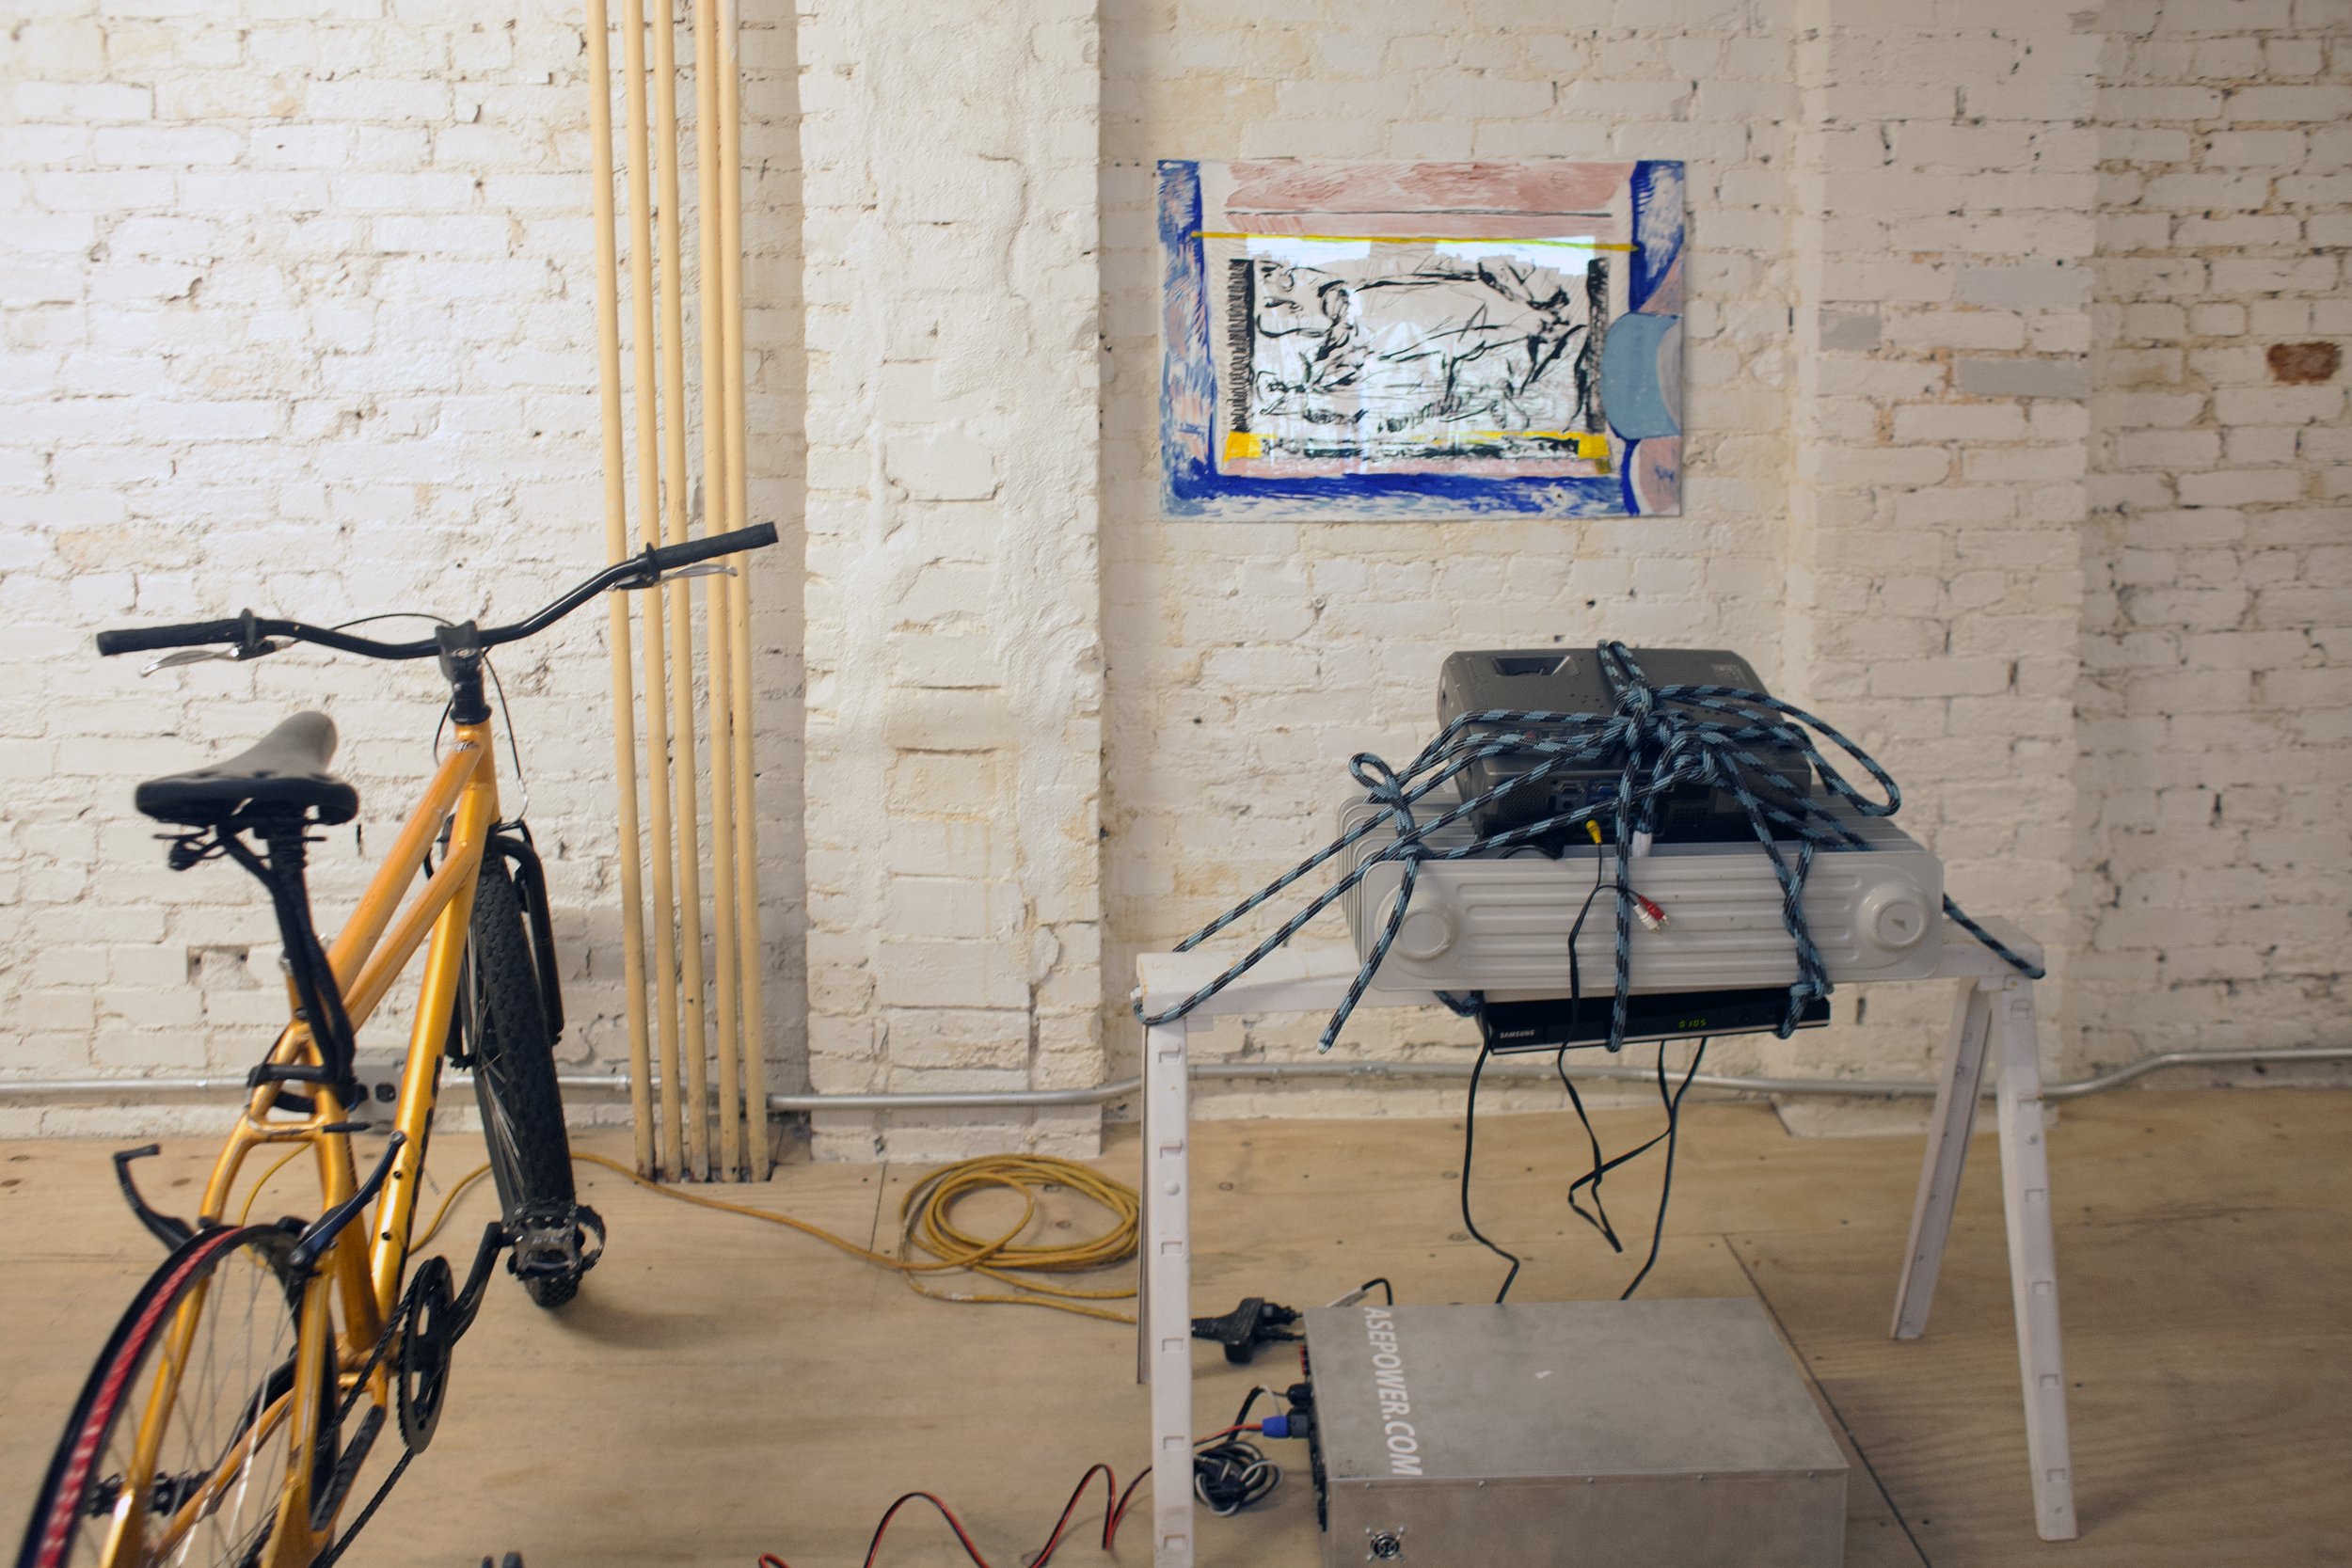   Untitled , 2013  Mixed media; charcoal and acrylic on paper, 20 x 30 inches  DVD player, The Cave of Forgotten Dreams DVD, Digital projector, radiator, climbing rope, bicycle, 300 watts generator, combiner box 